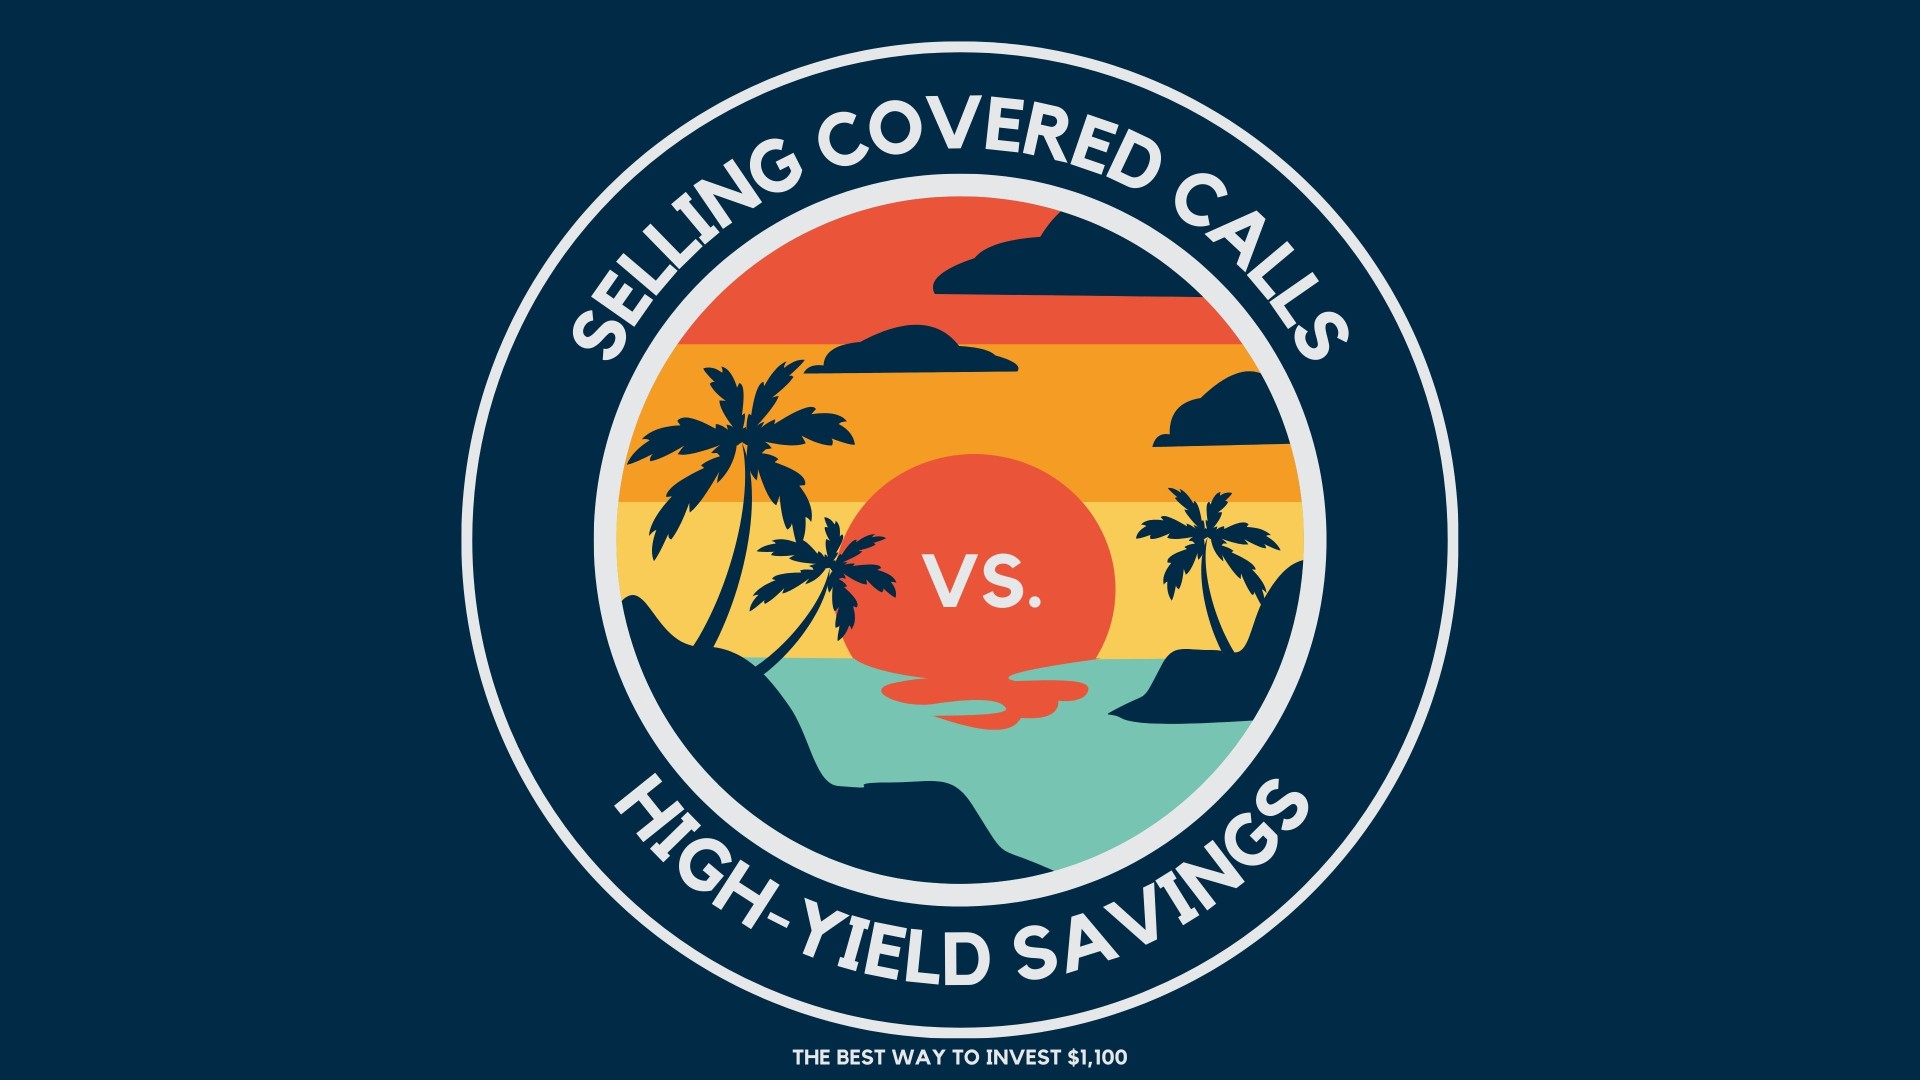 Selling Covered Calls vs HYSA